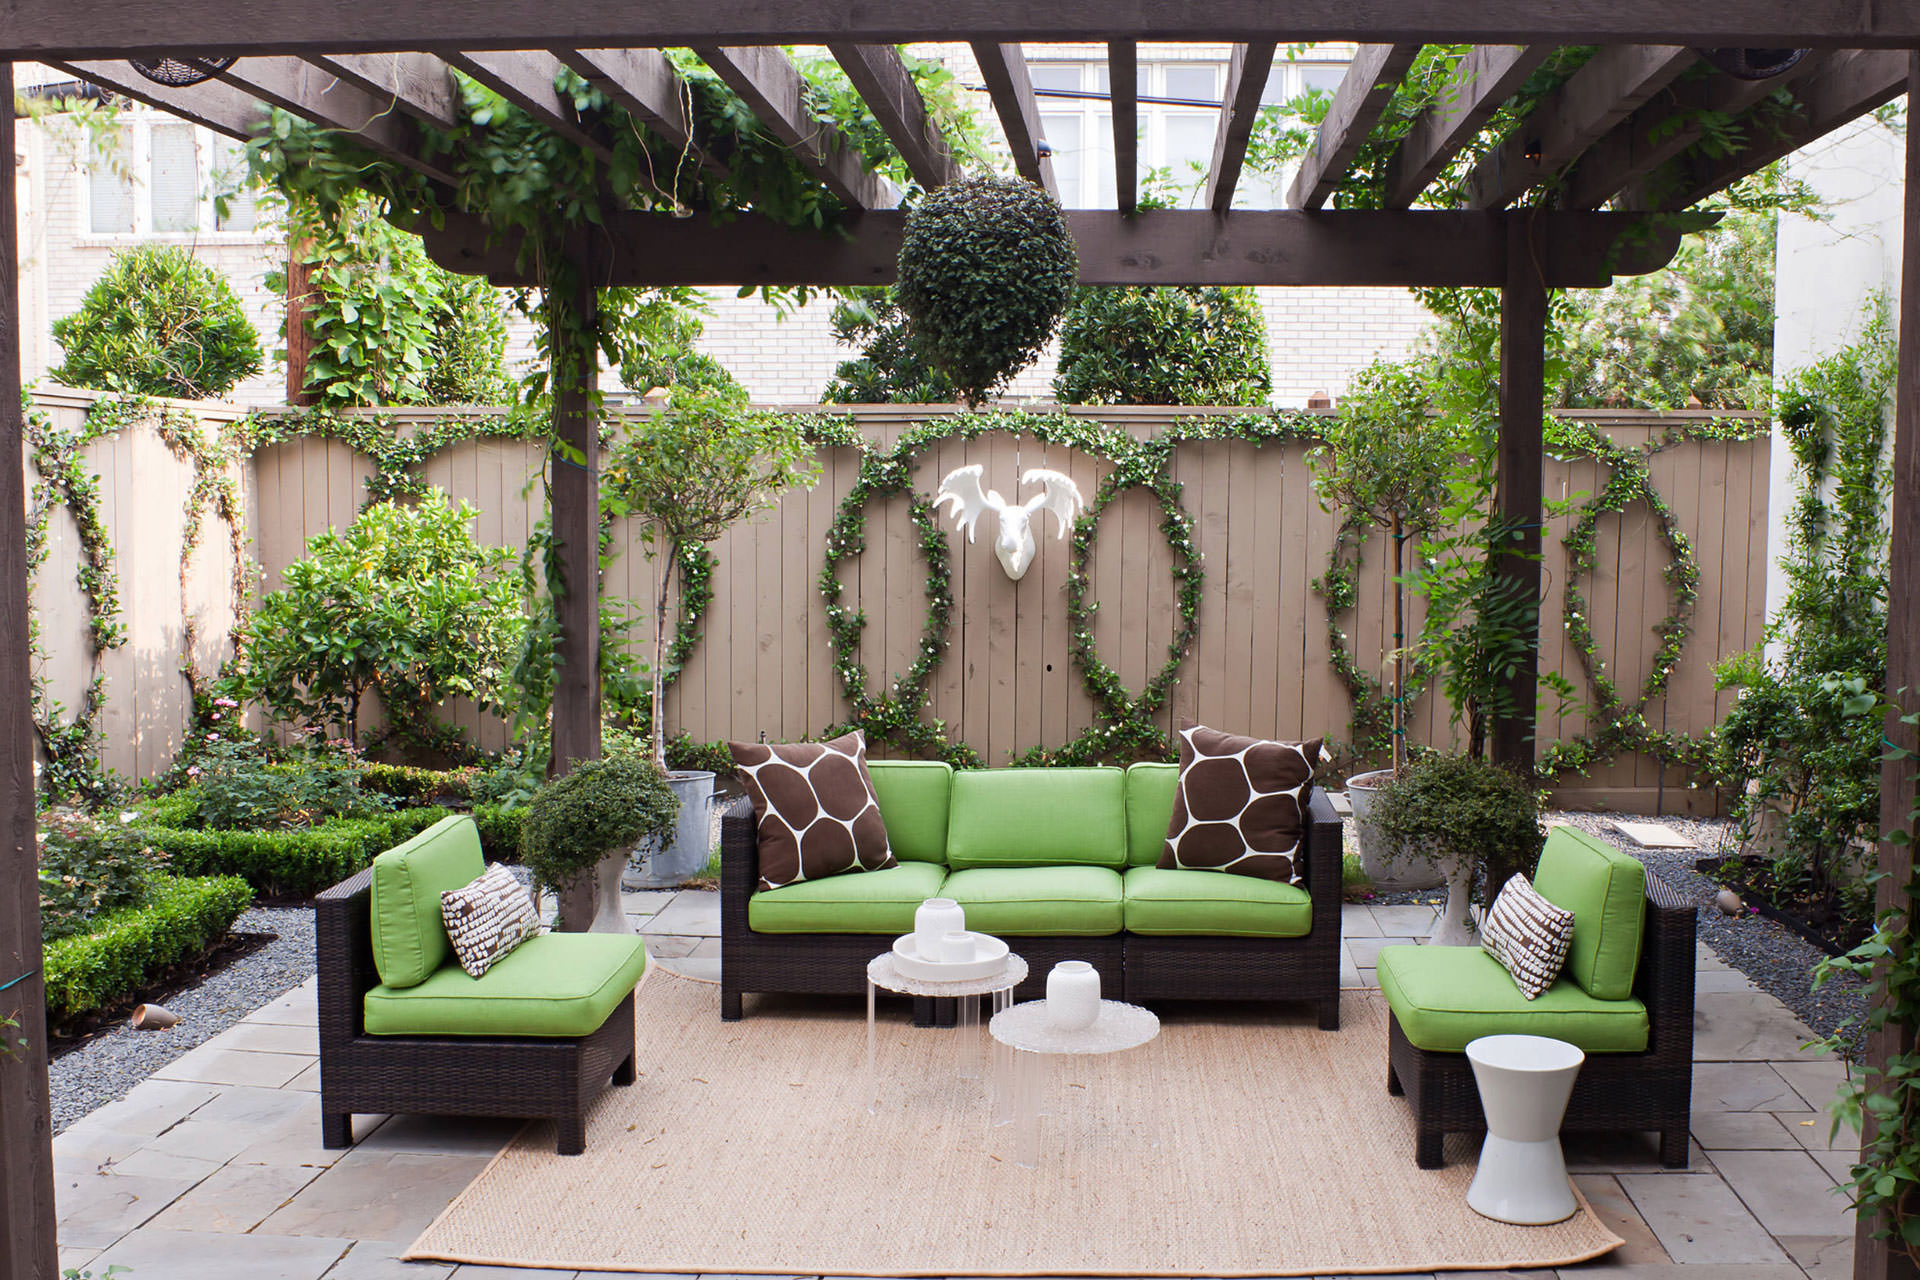 An outdoor space with green furniture and a pergola.